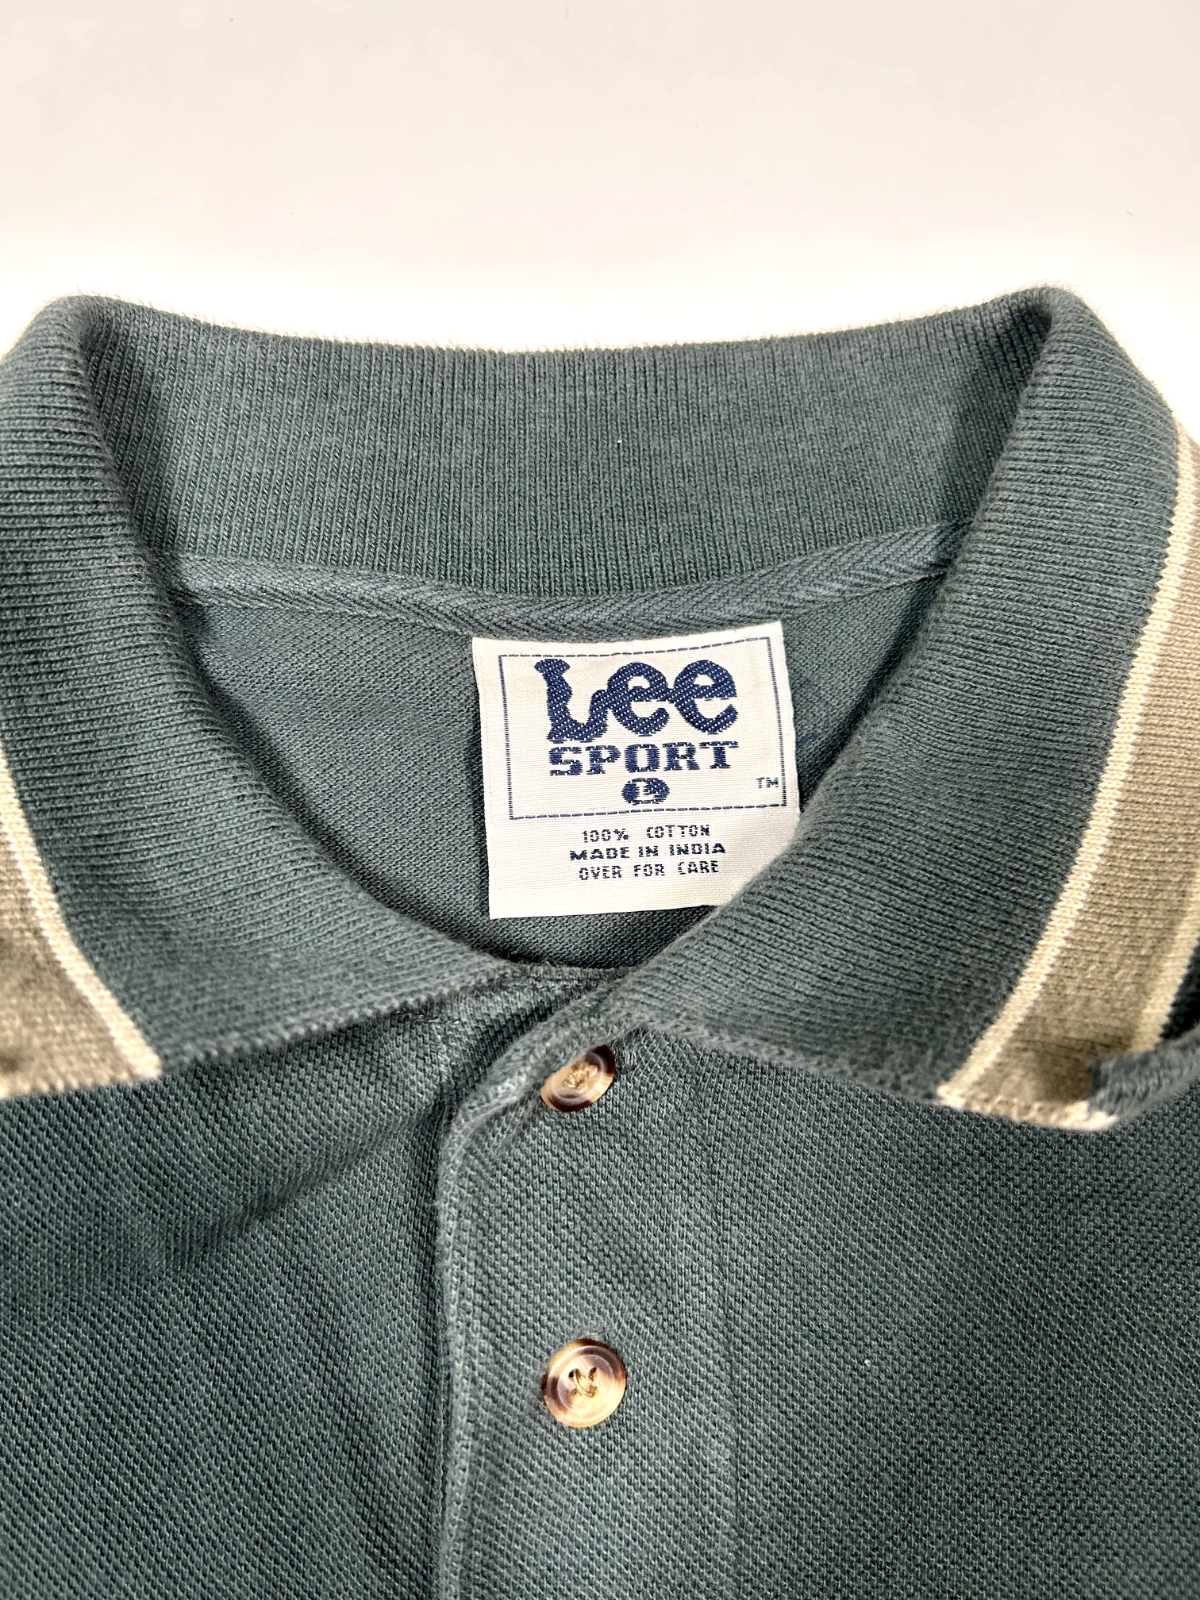 Vintage Green Bay Packers NFL Lee Sport 1/4 Button Up Shirt Size Large Green